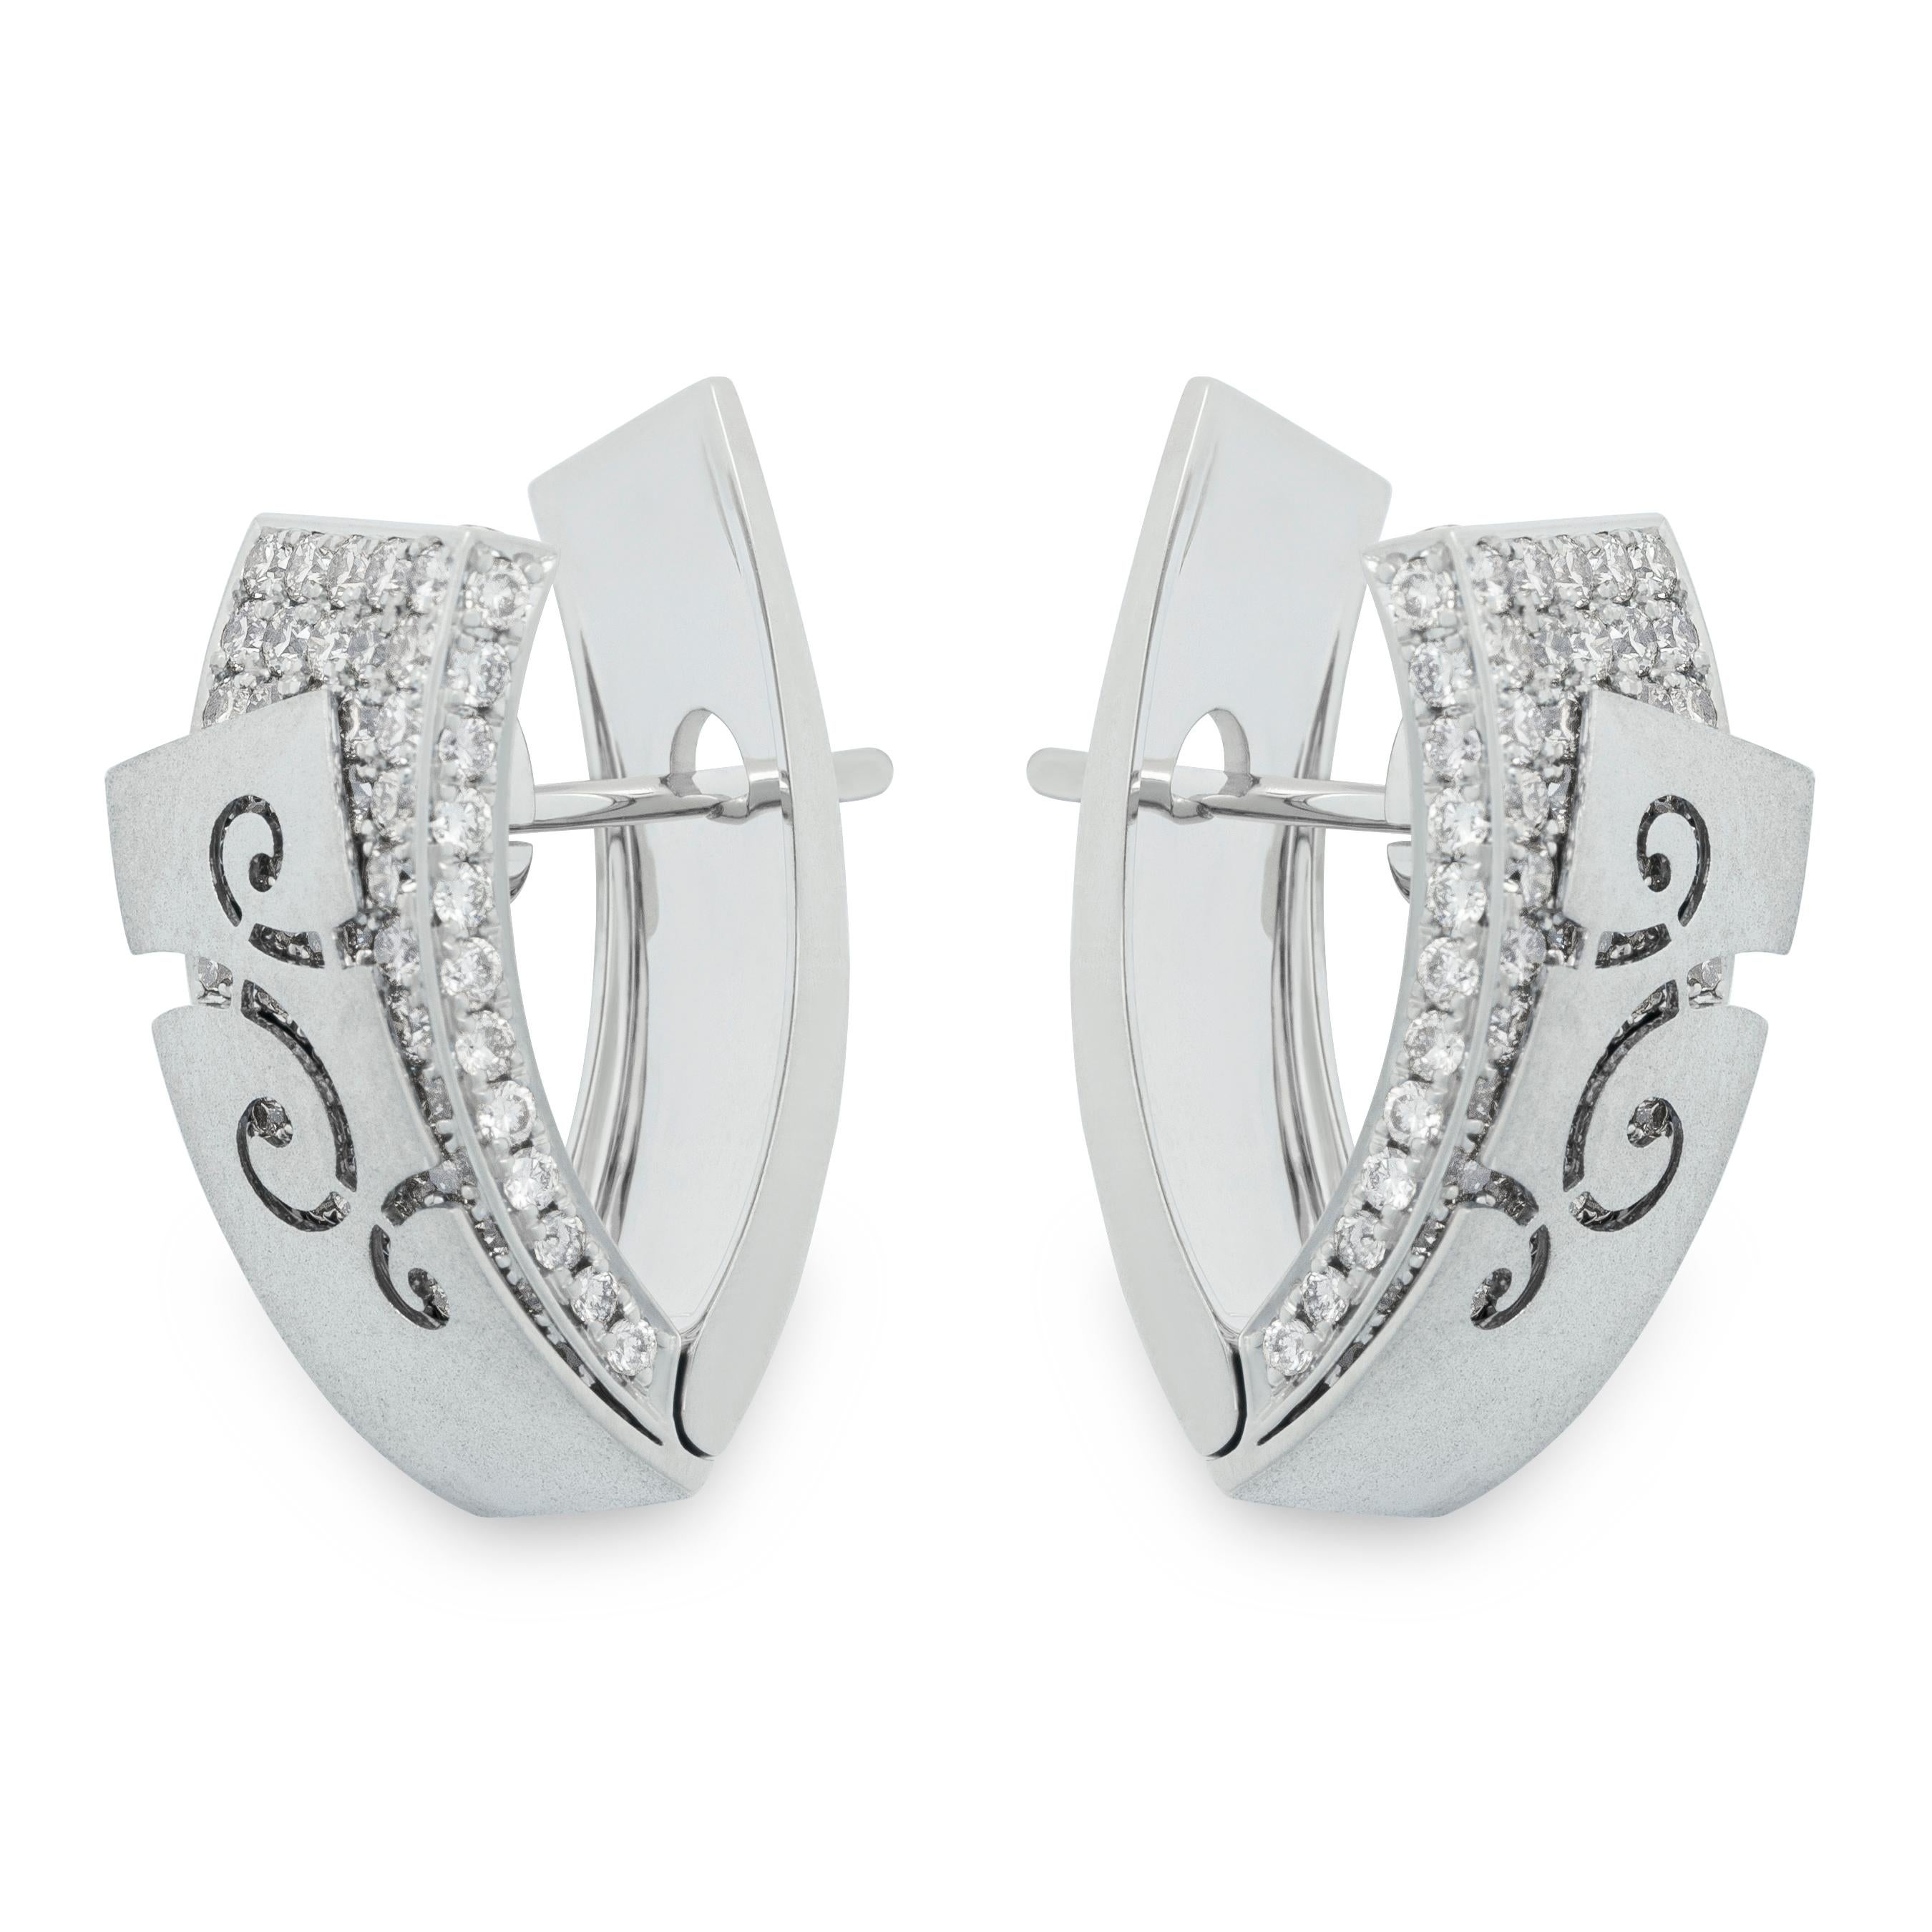 Diamonds 18 Karat White Gold Veil Earrings

Veil inspired this jewelry series by our designers. For example, these Earrings seem to have two layers. The first layer is a 